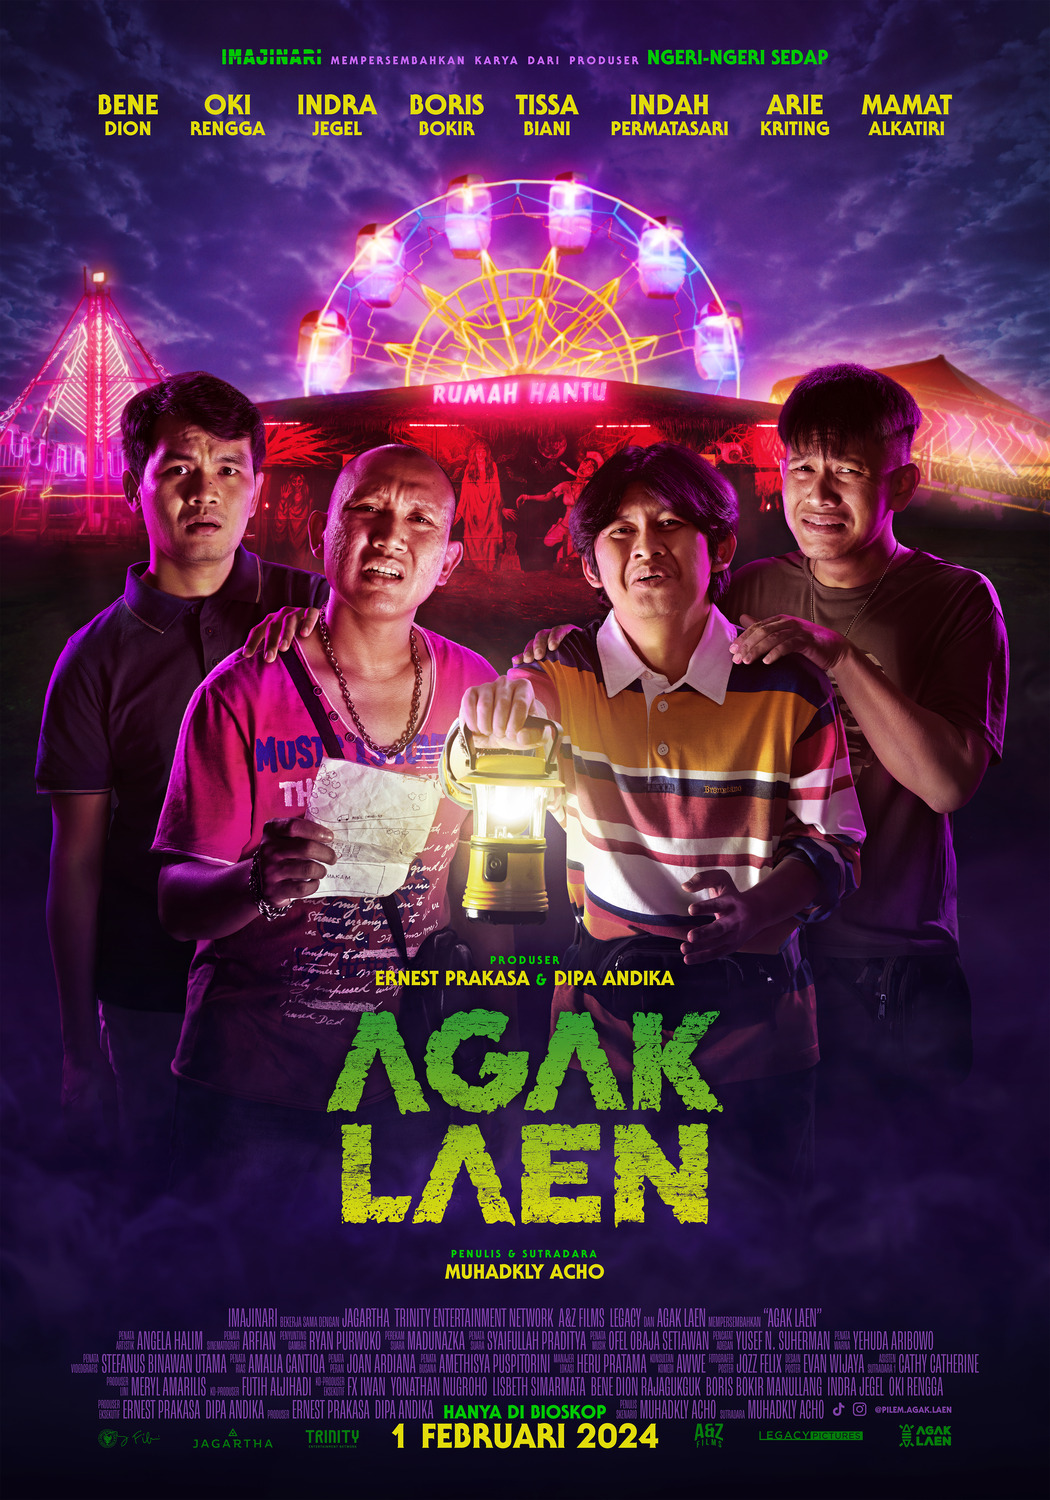 Extra Large Movie Poster Image for Agak Laen (#2 of 2)